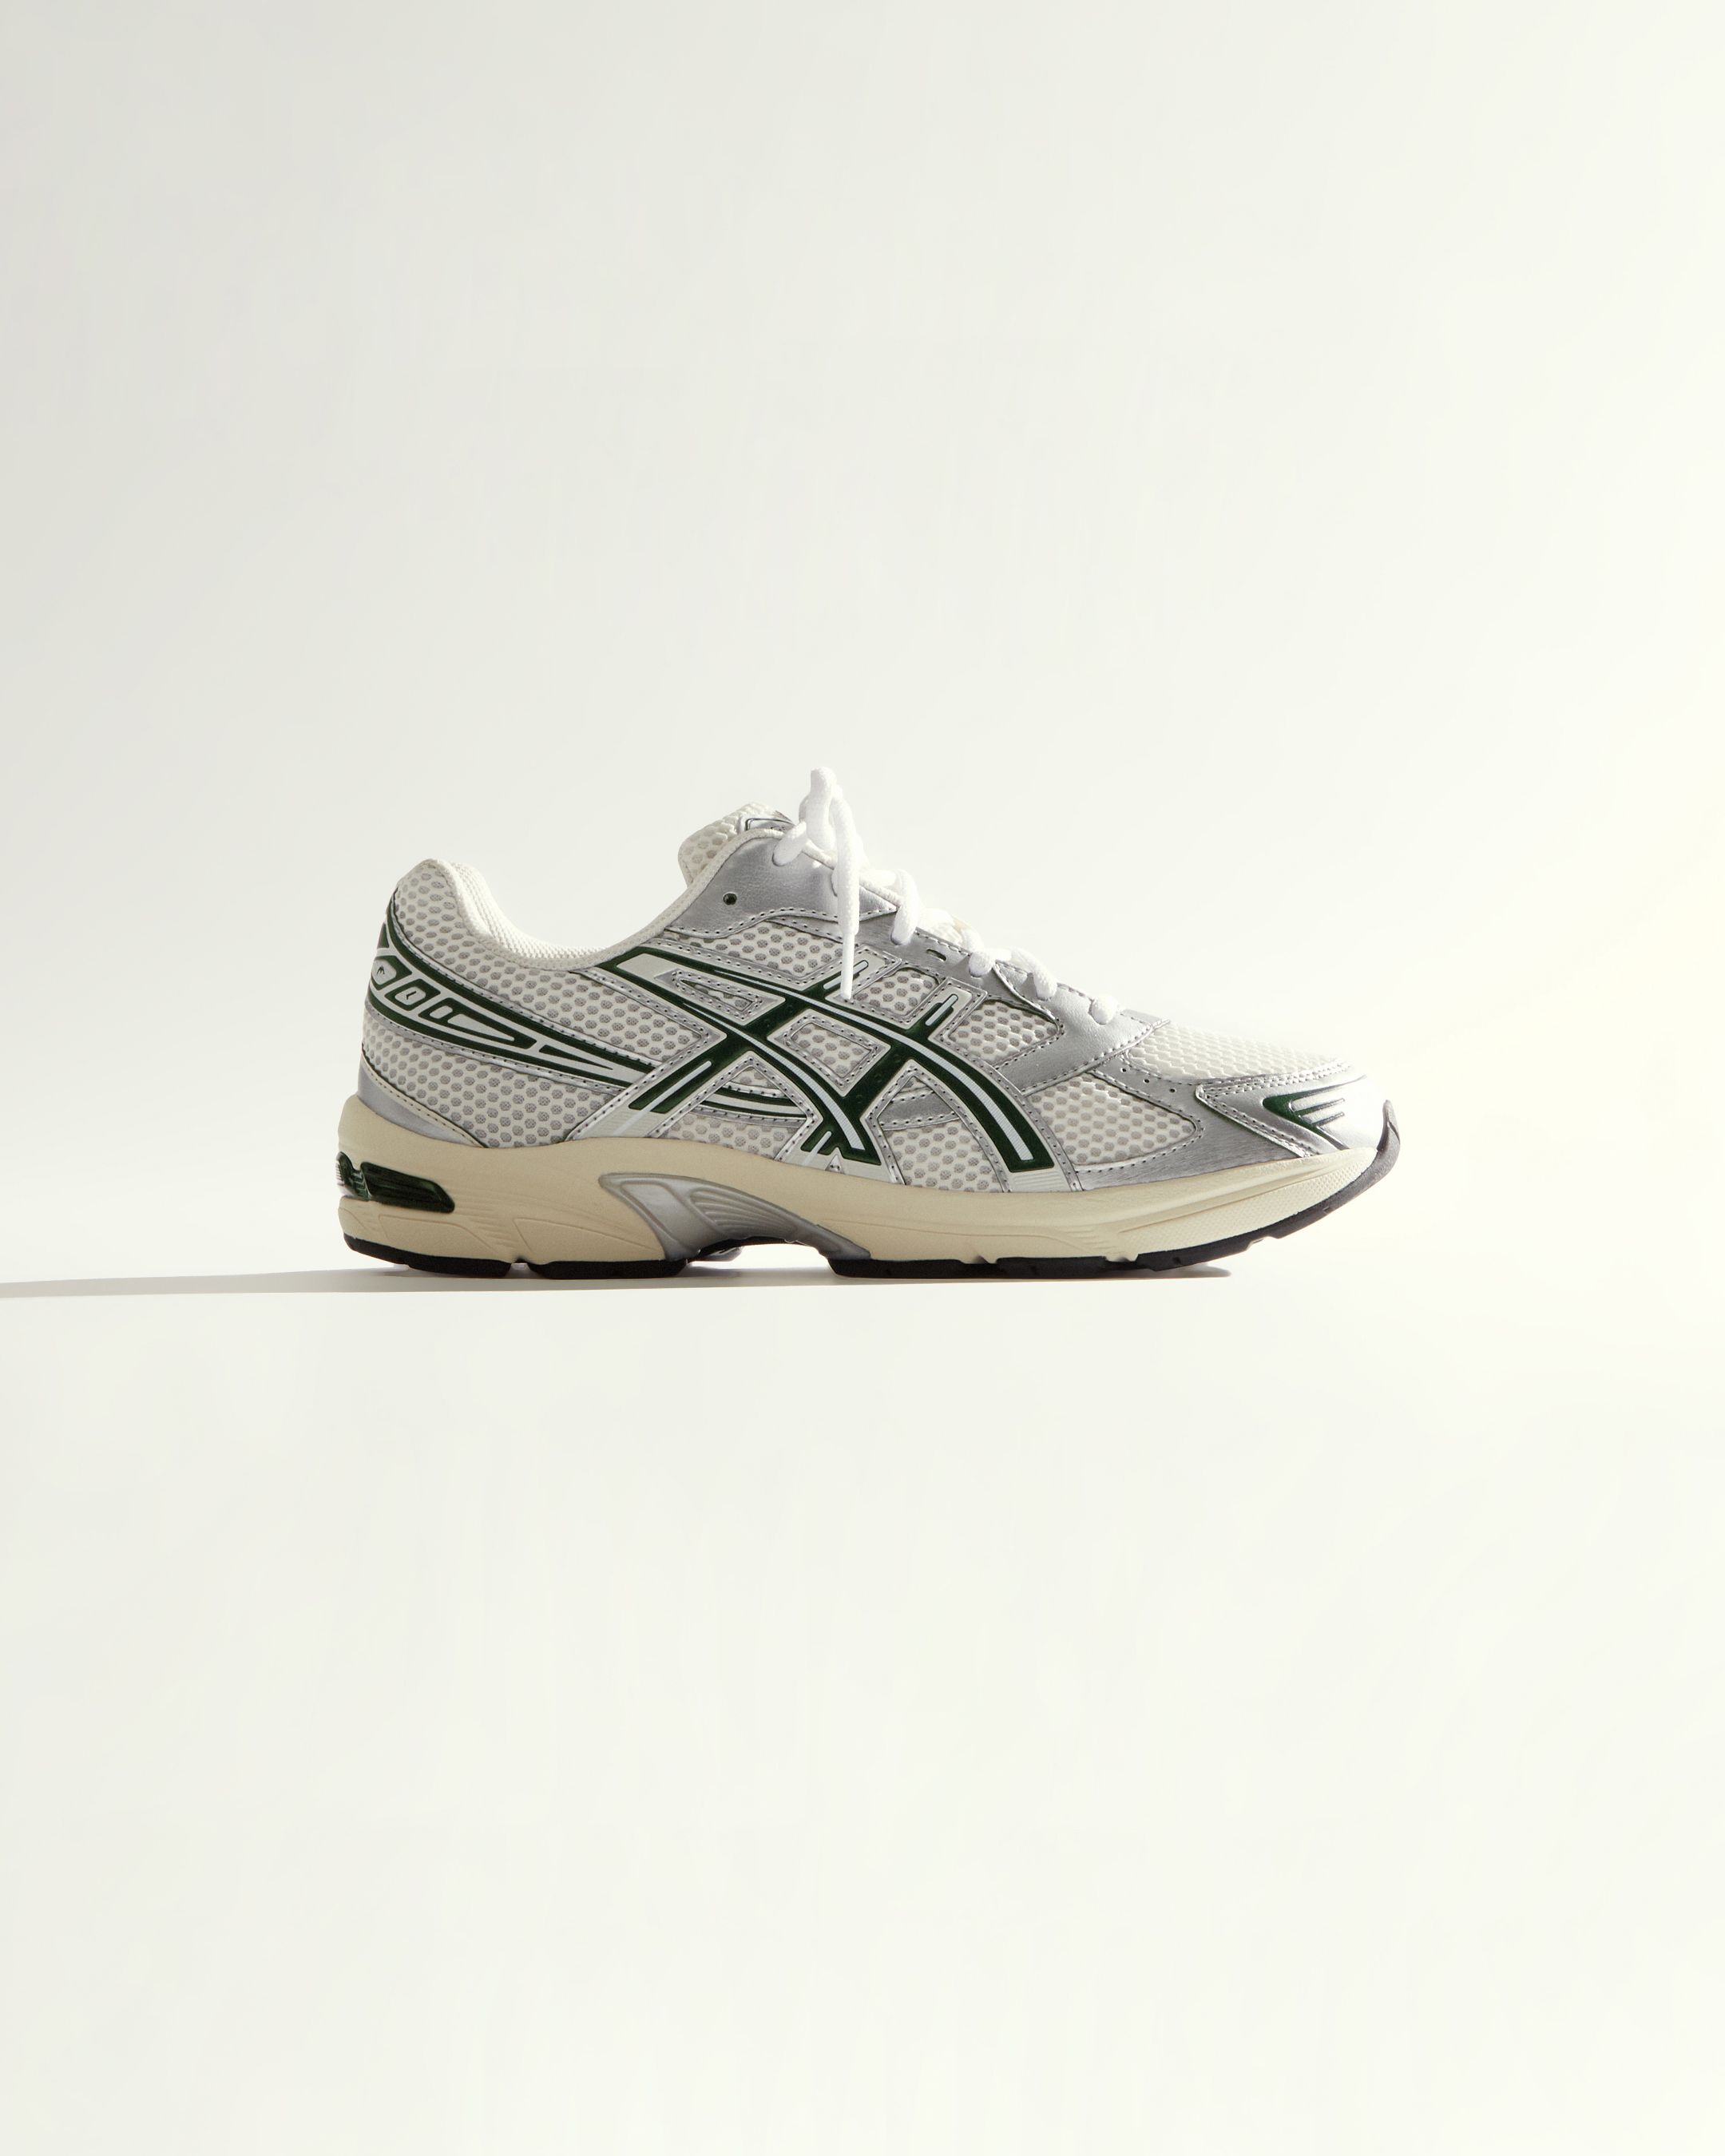 The Kith x Asics Vintage Tech Collection Releases June 23 | House 